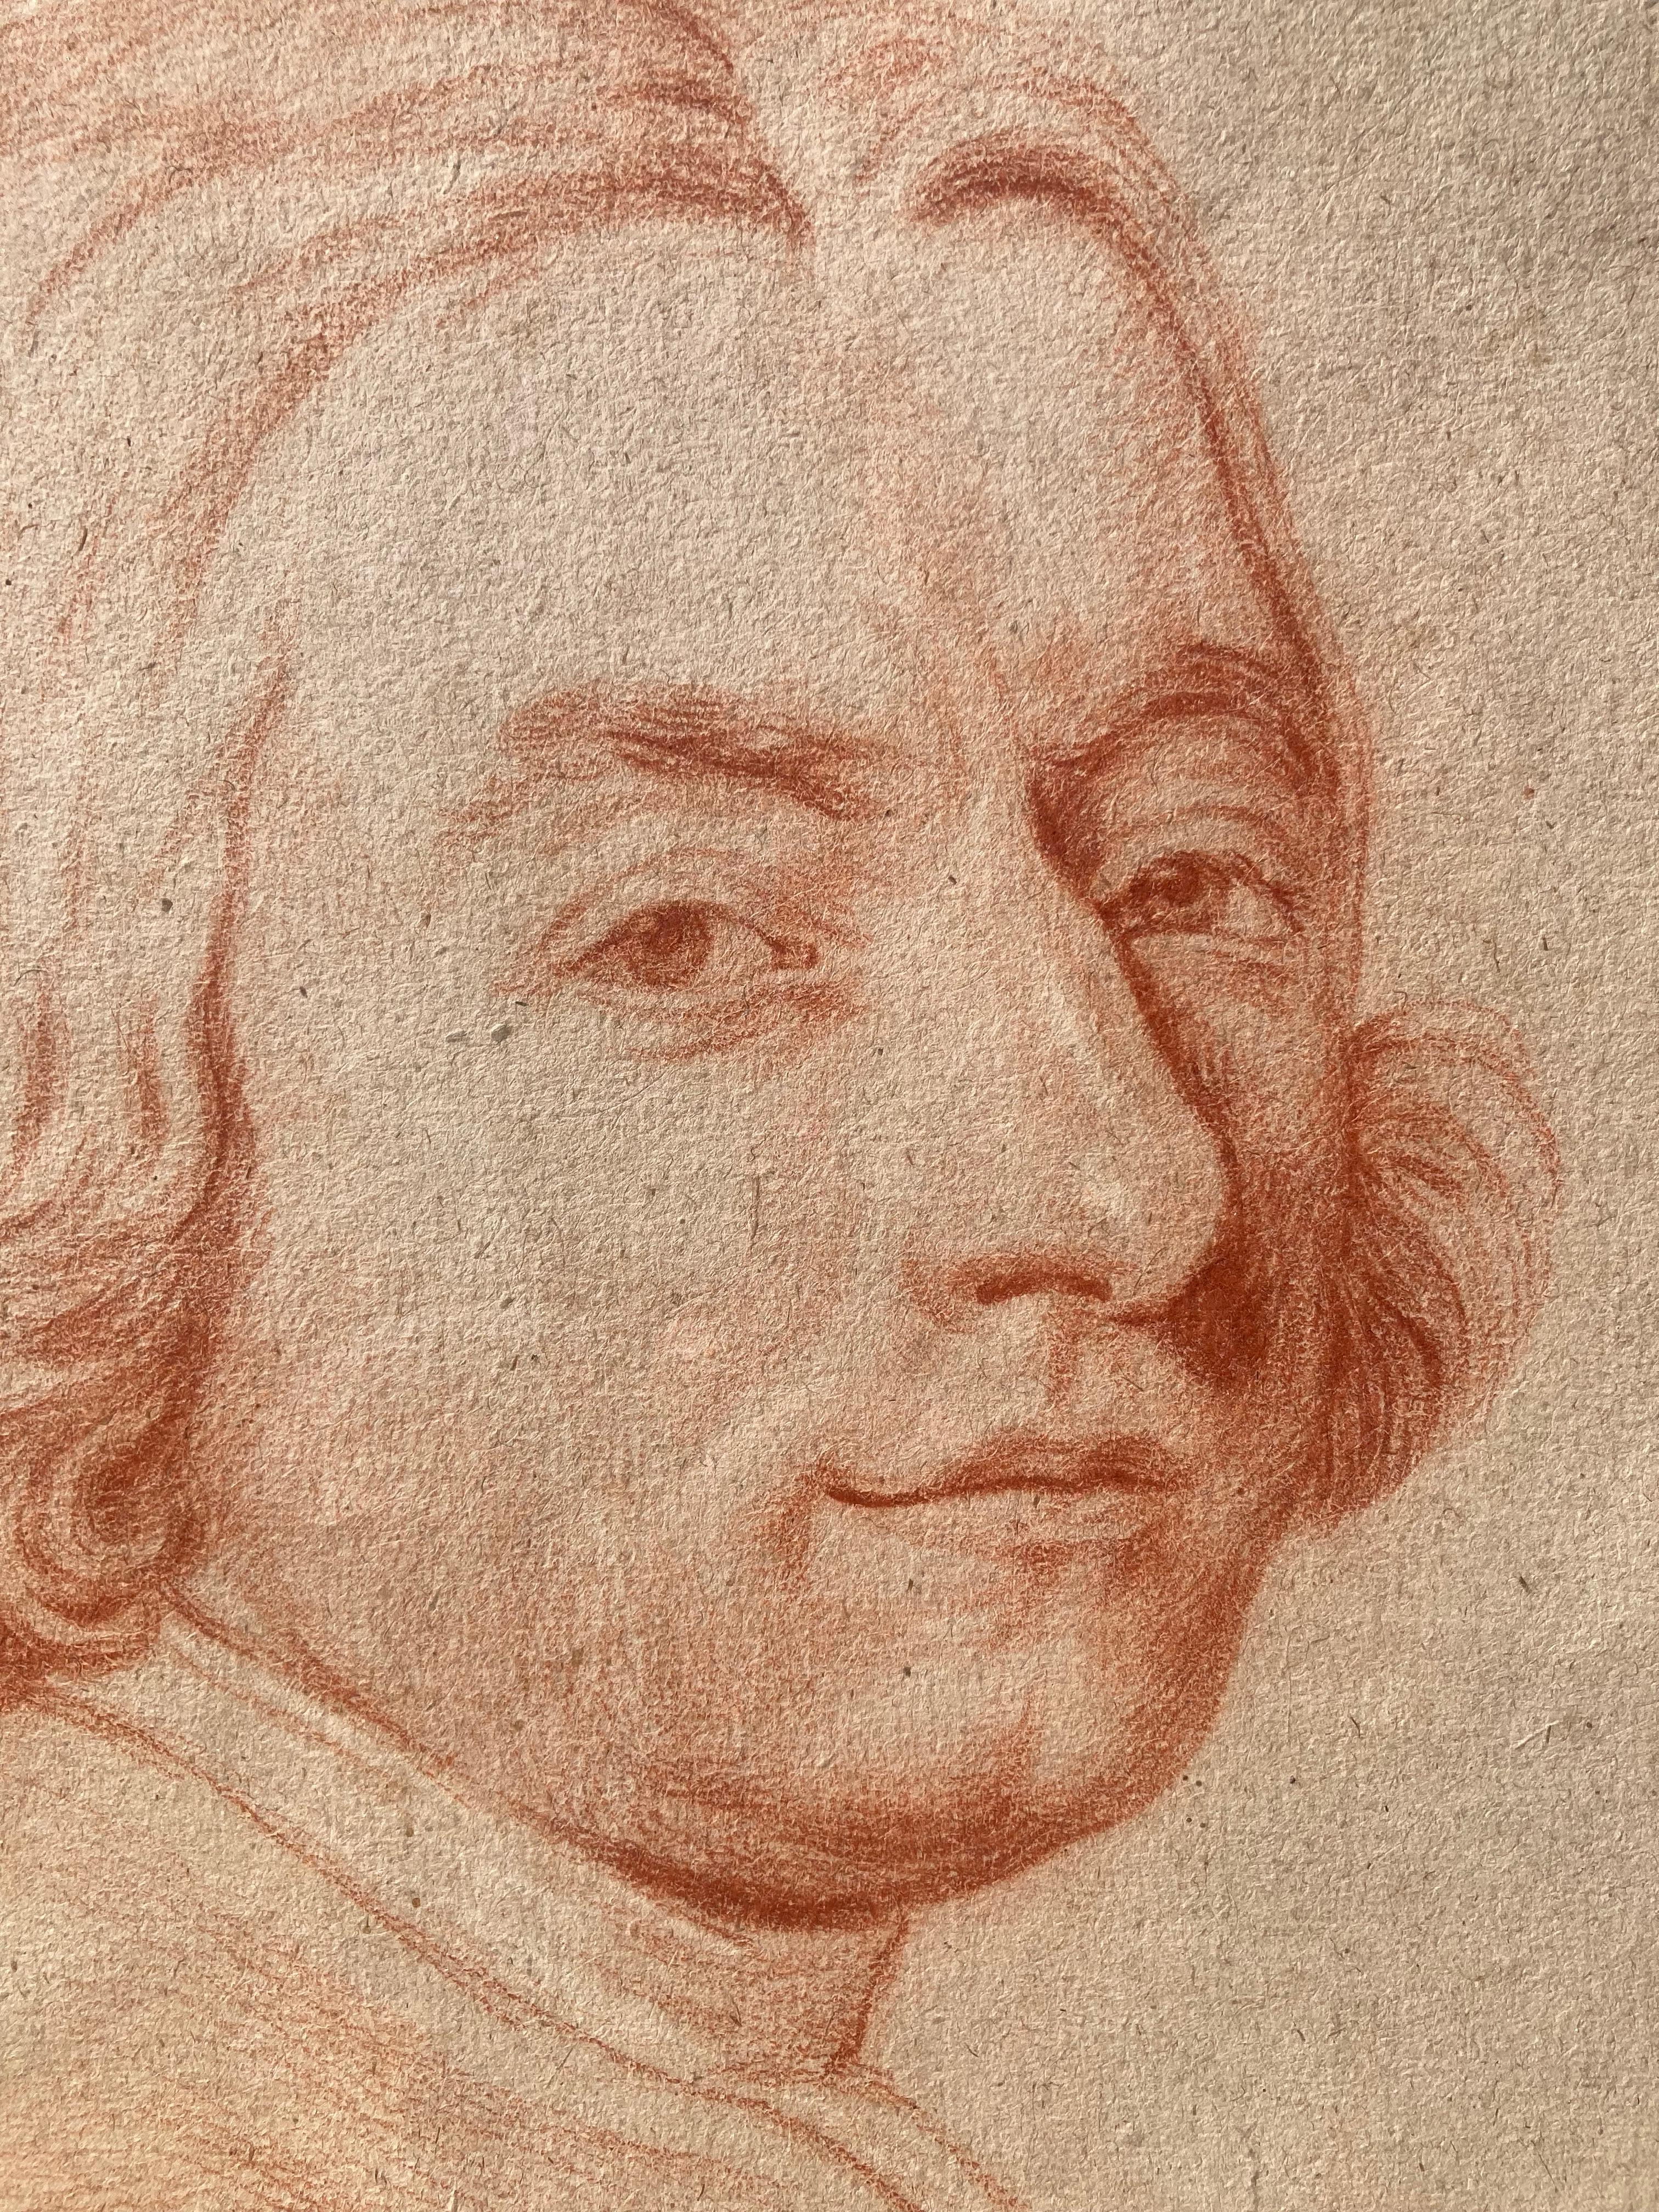 French School, 18th Century, Portrait Of A Man Seen From Three Quarters, chalk For Sale 3